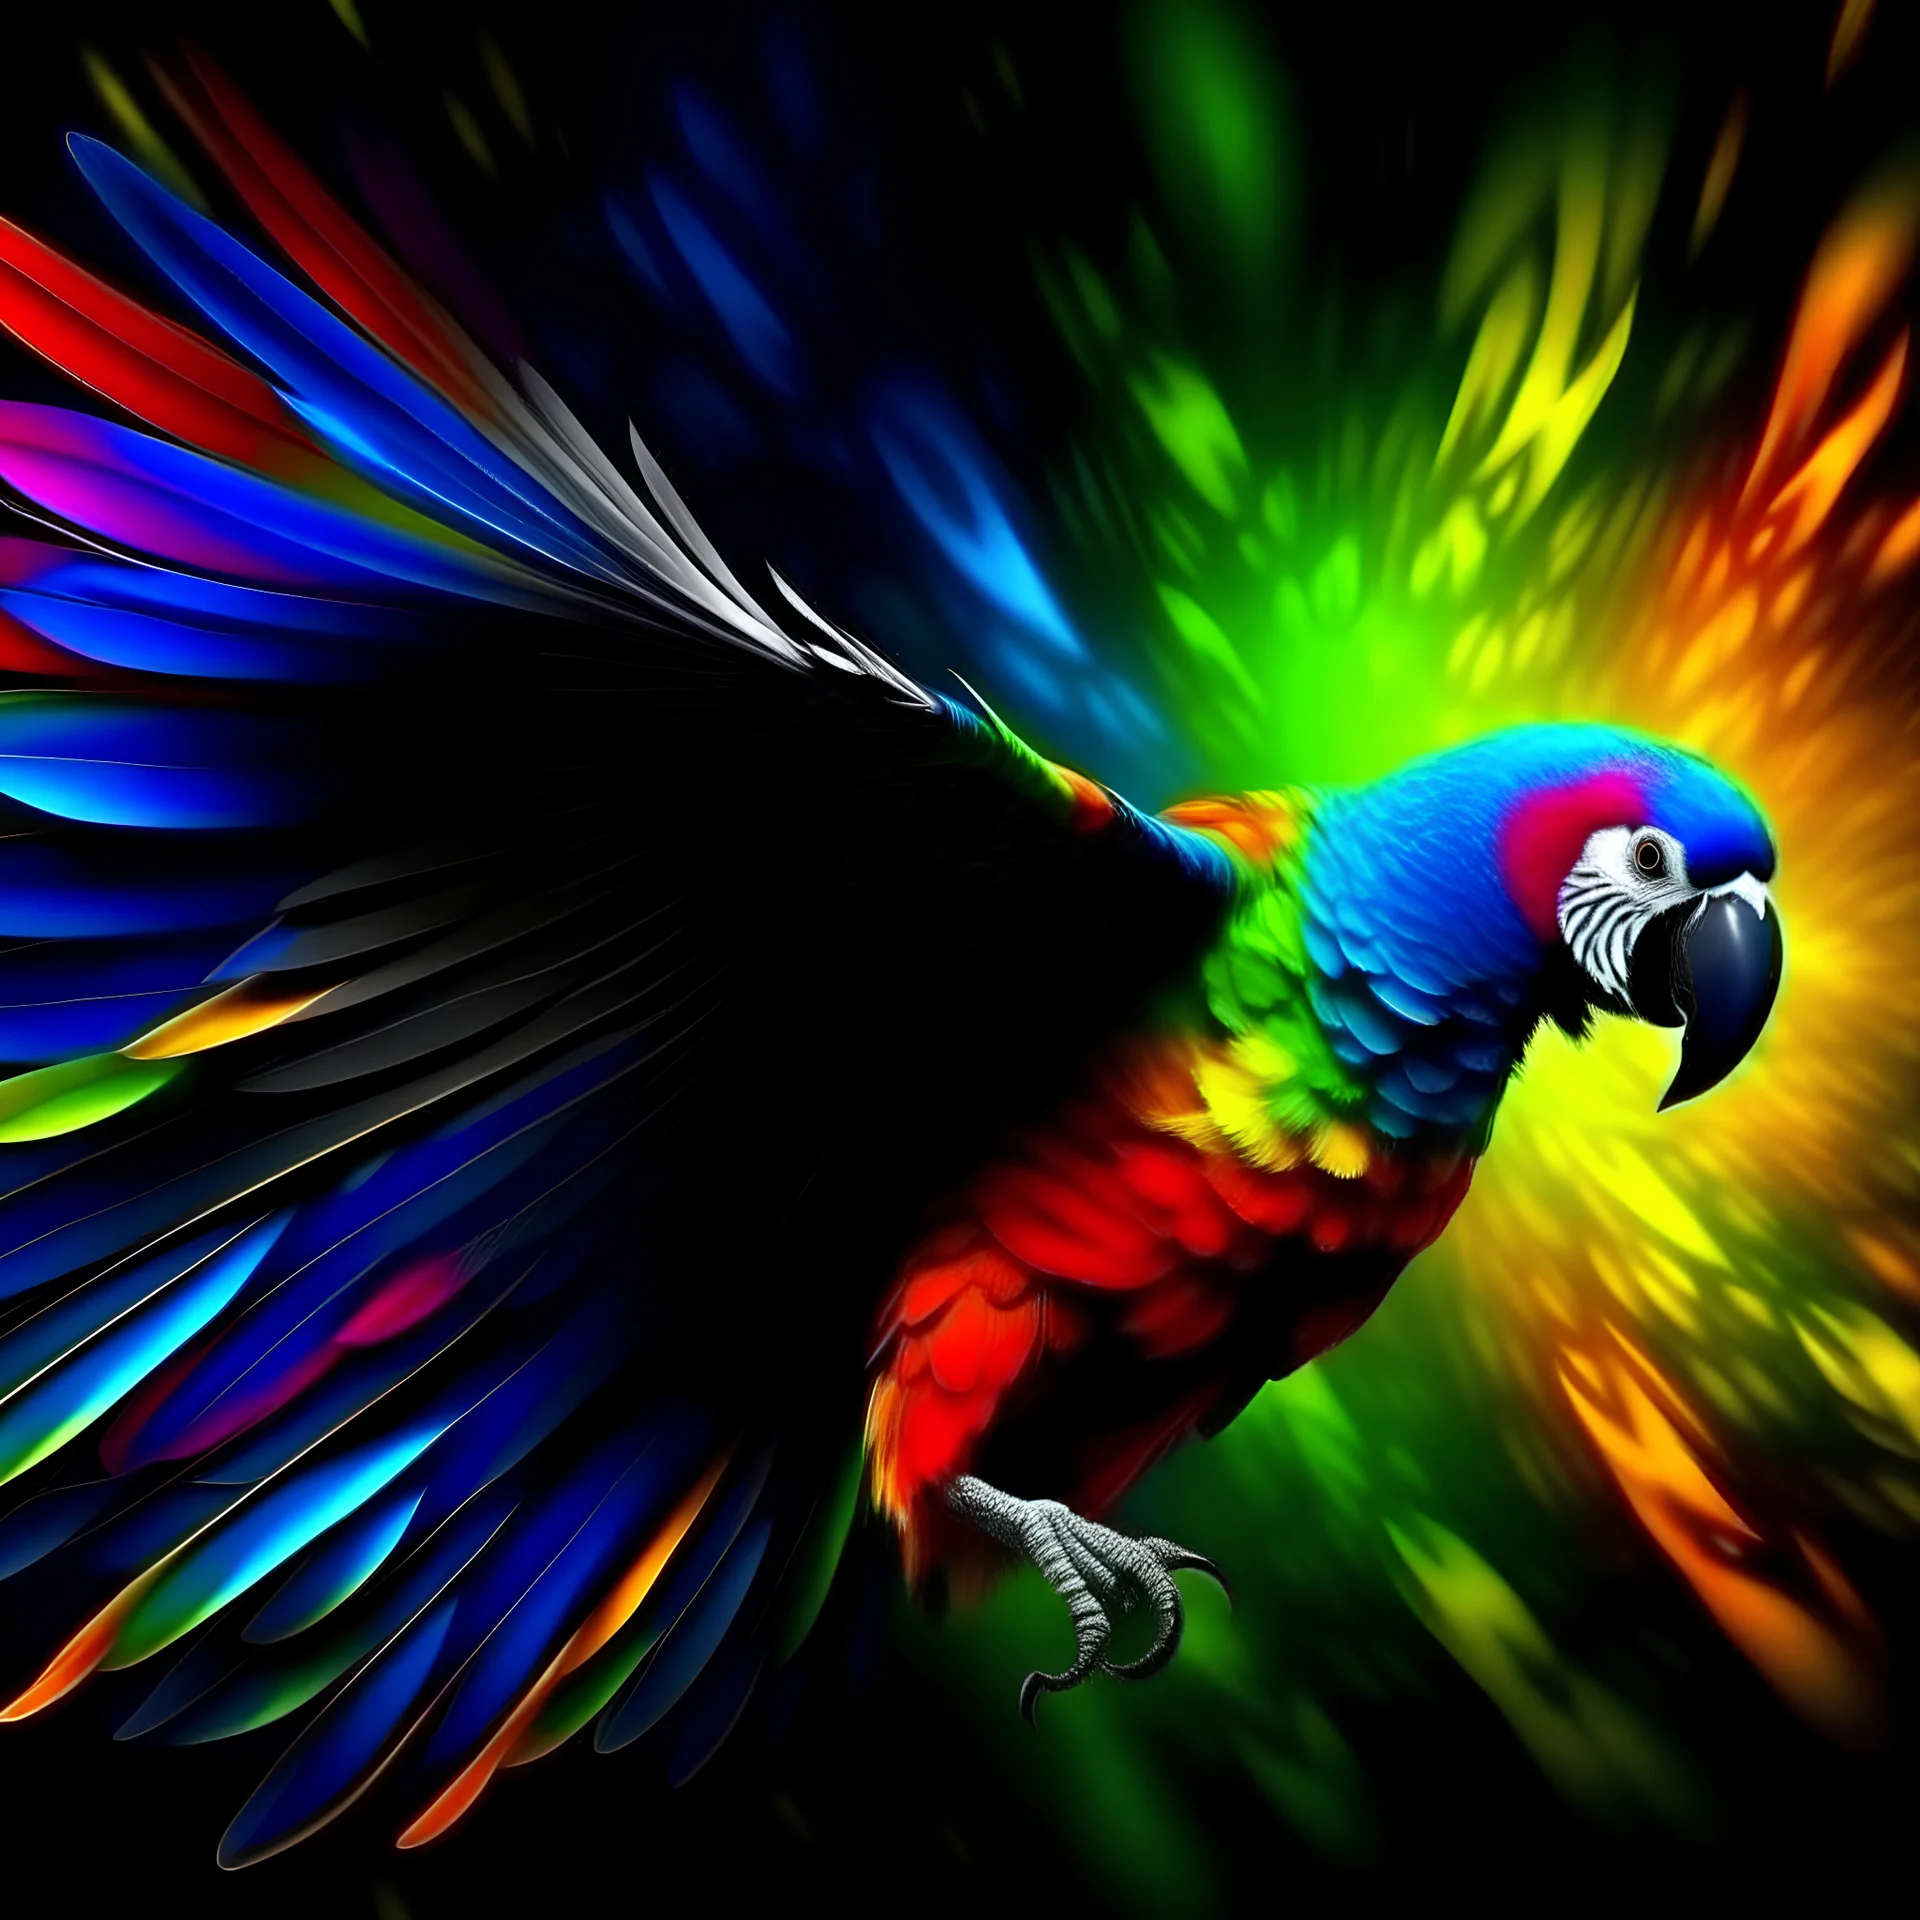 Flying colorful parrot takes me to my dream land, fractal recrusive whimsical stylized gothic realistic colorful dreamy scene